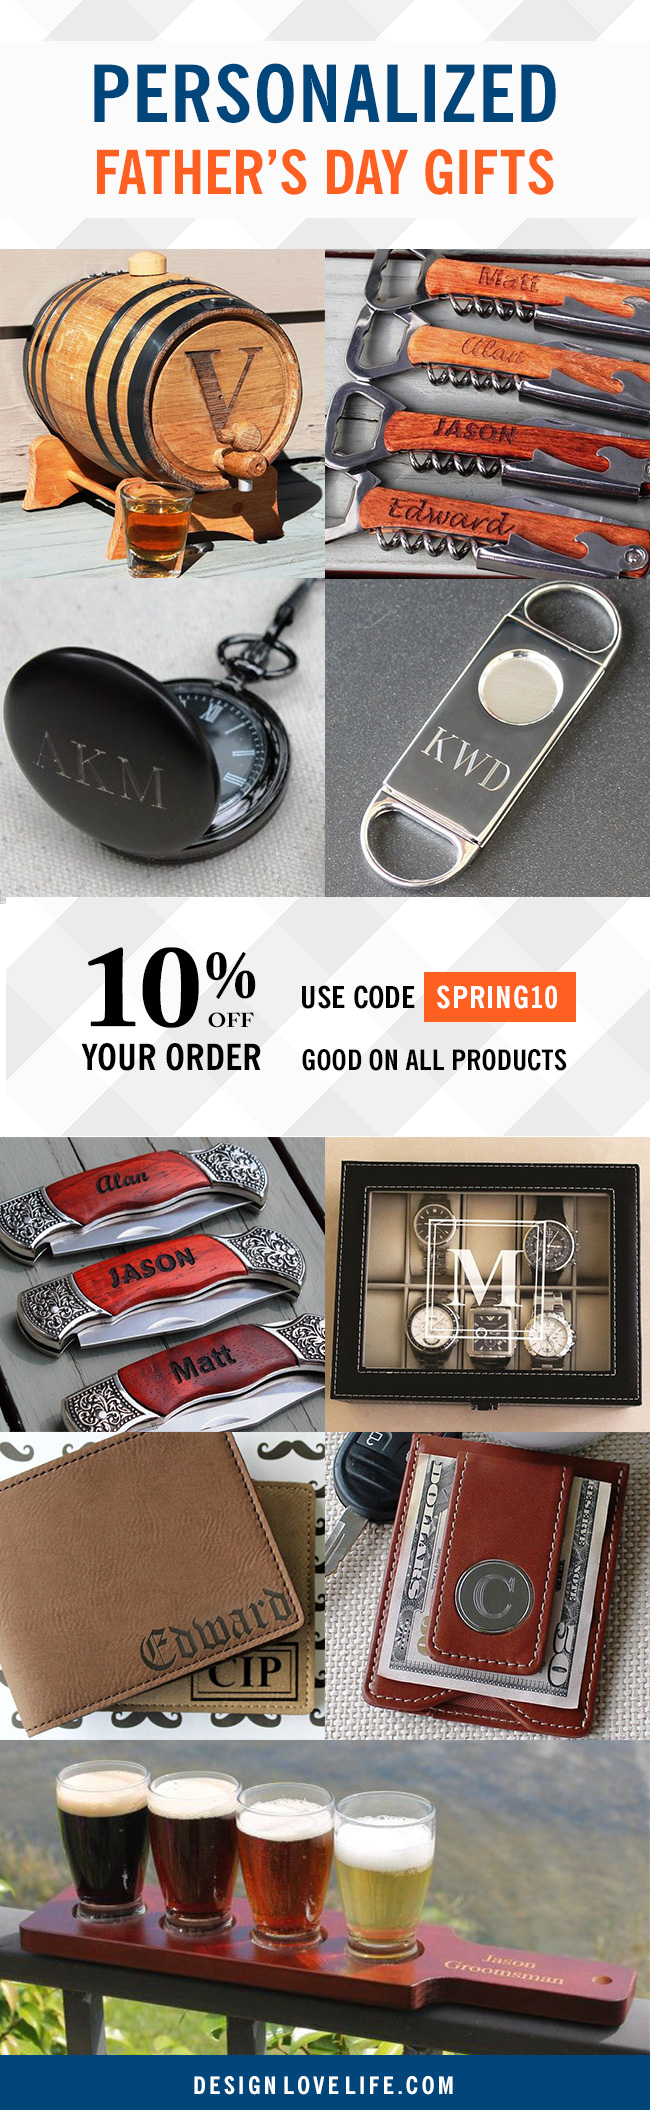 Personalized Fathers's Day Gifts | Annie Johnson. Design Love Life